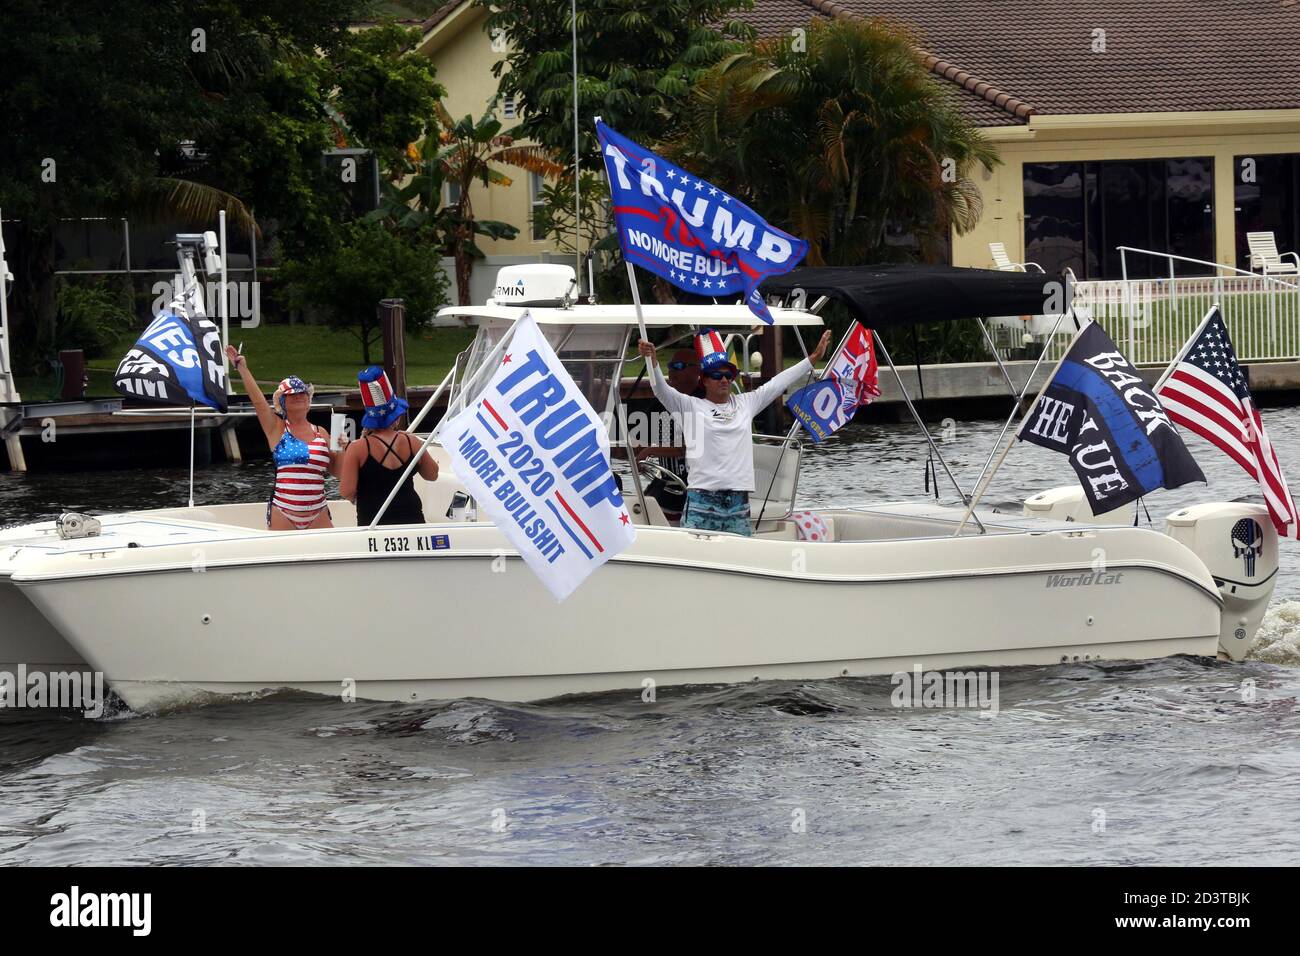 Donald Trump fans were out in their boats in droves during torrential rain to show their support during today's Trump 2020 Flotilla along the Intracoastal Waterways that began at Fort Lauderdale Sunrise Bay and ended at Boca Lake in Boca Raton with some sunshine.  The Avid supporters from 'Boaters For Trump South Florida' proudly Promoted the COVID stricken President for his 2020 Re-election during today's Trump 2020 Flotilla.  Jim Norton (US House of Rep), Catherine McBreen (Supervisor Board of Elections), Brian Norton (State Senator)and Carla Spalding (running against Debbie Wasserman-Schult Stock Photo